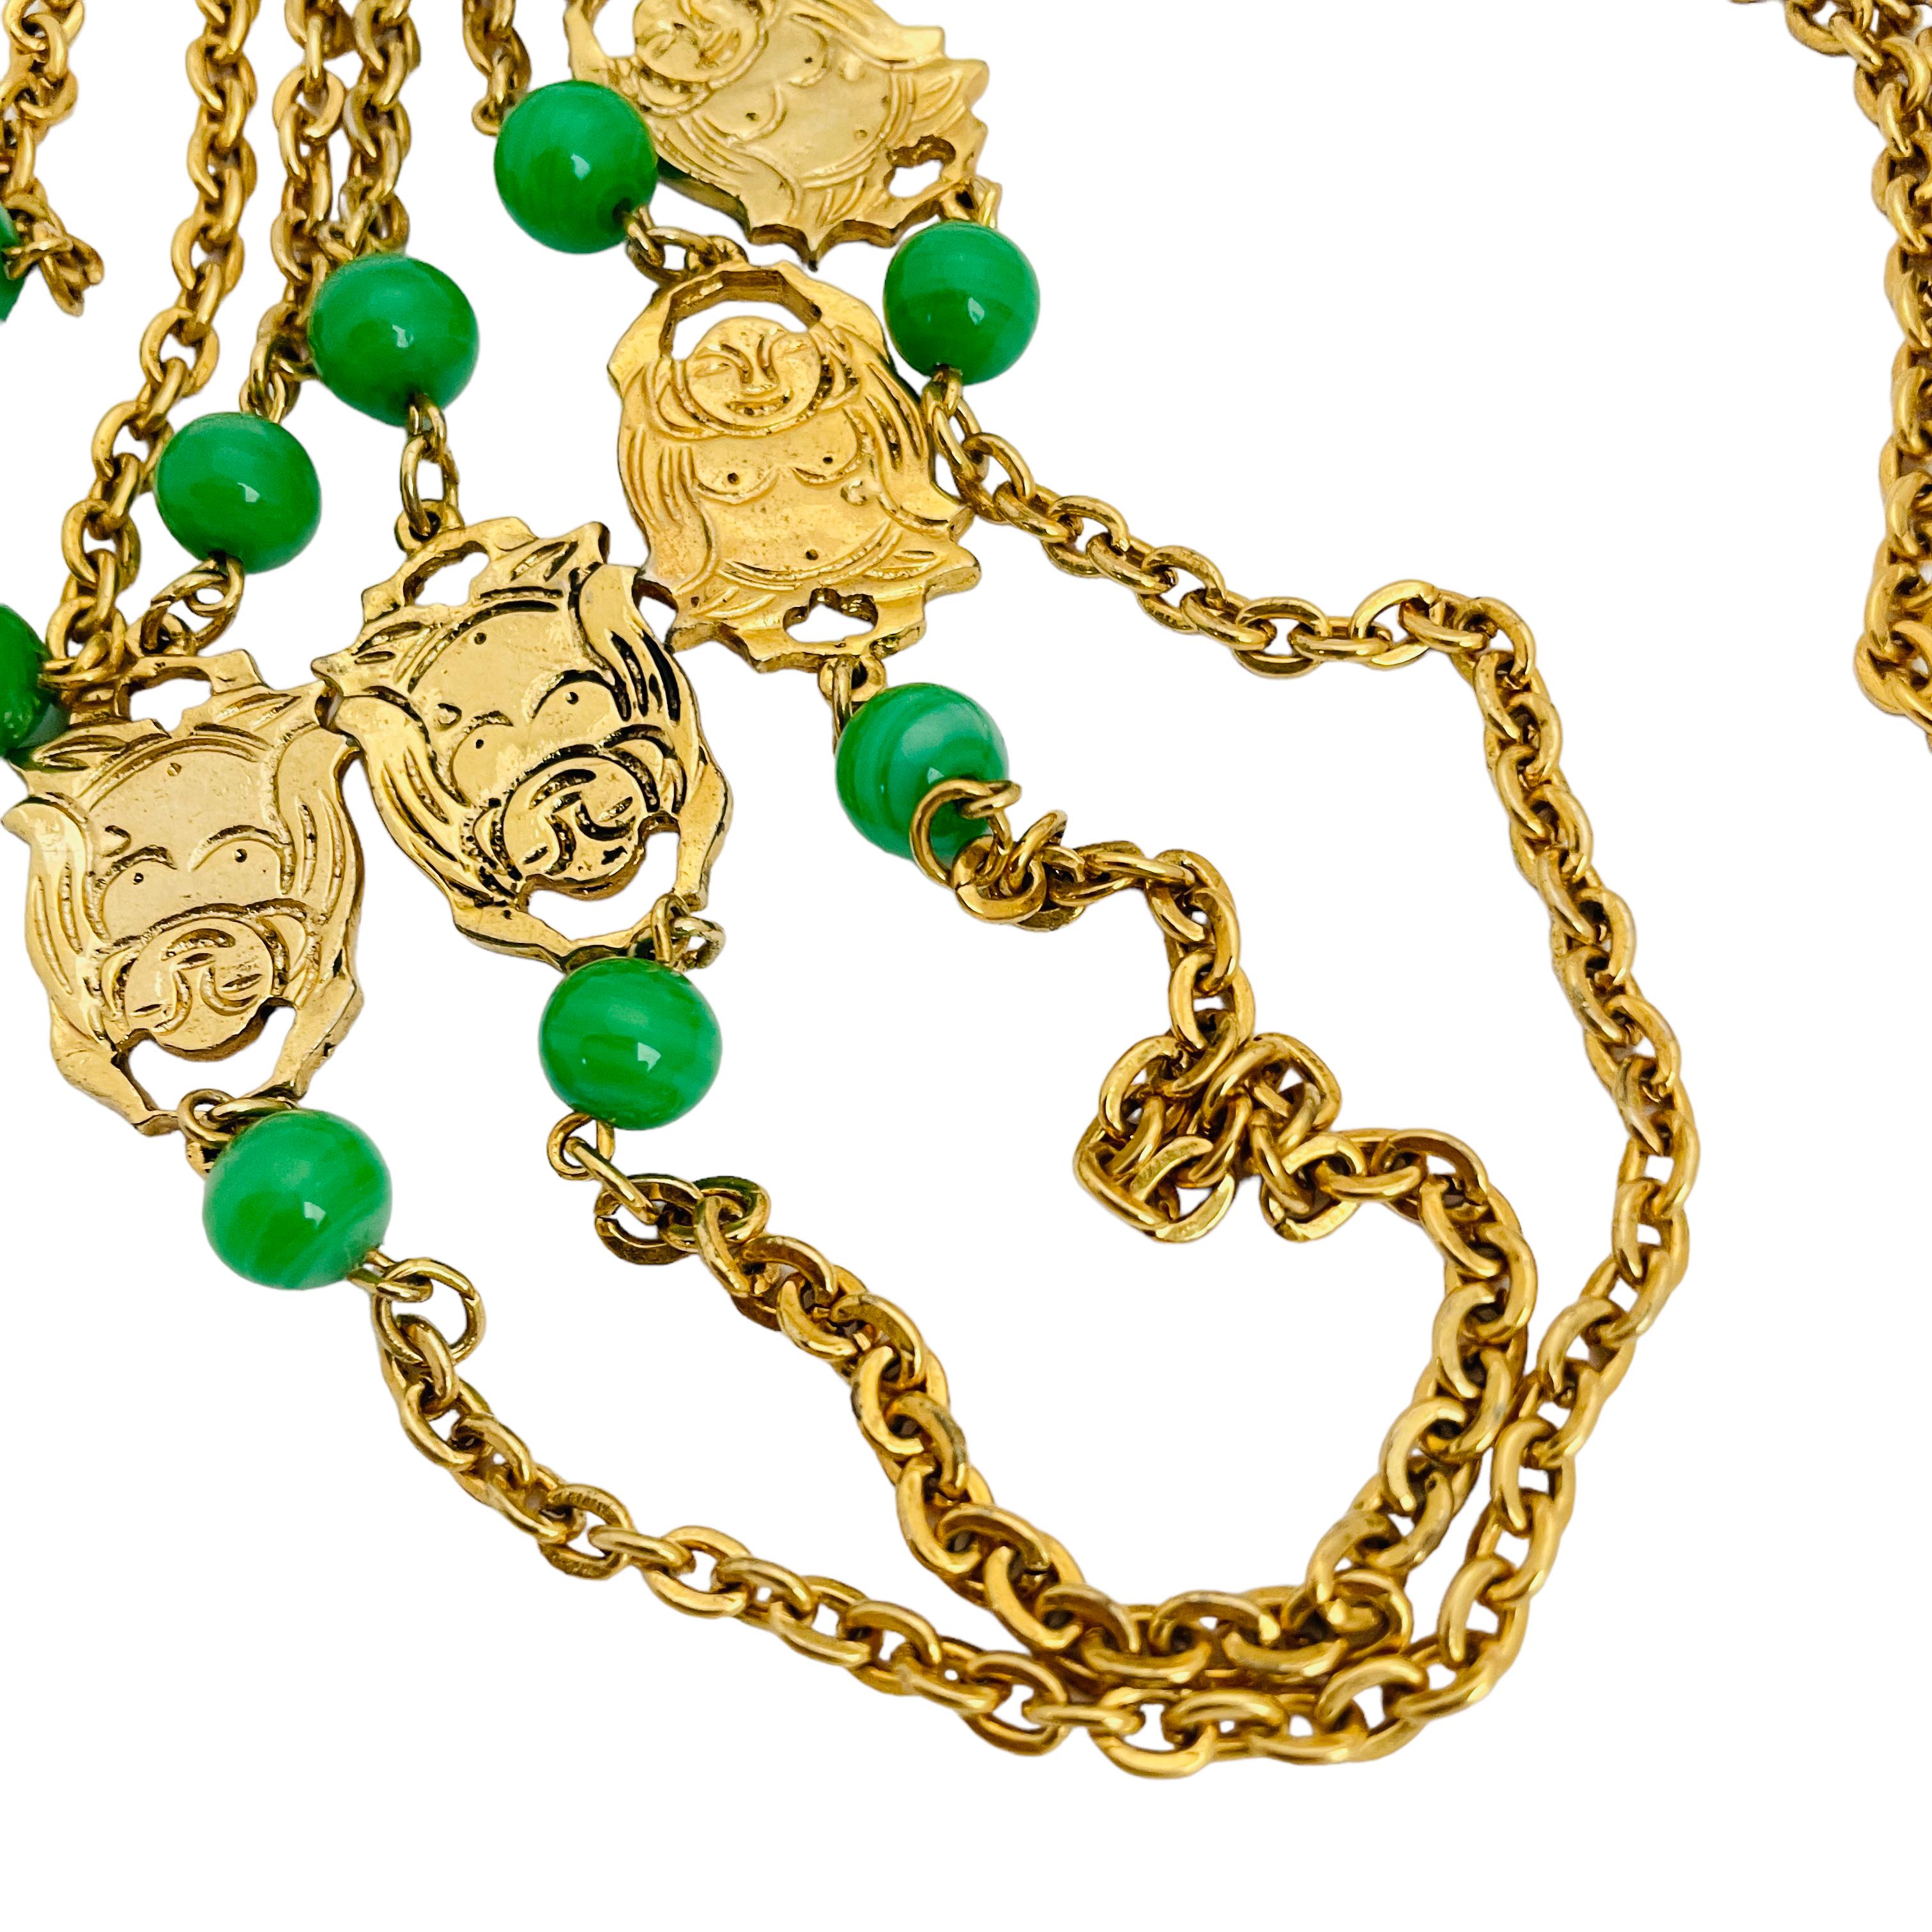 Vintage gold buddha chain glass jade designer runway necklace In Good Condition For Sale In Palos Hills, IL